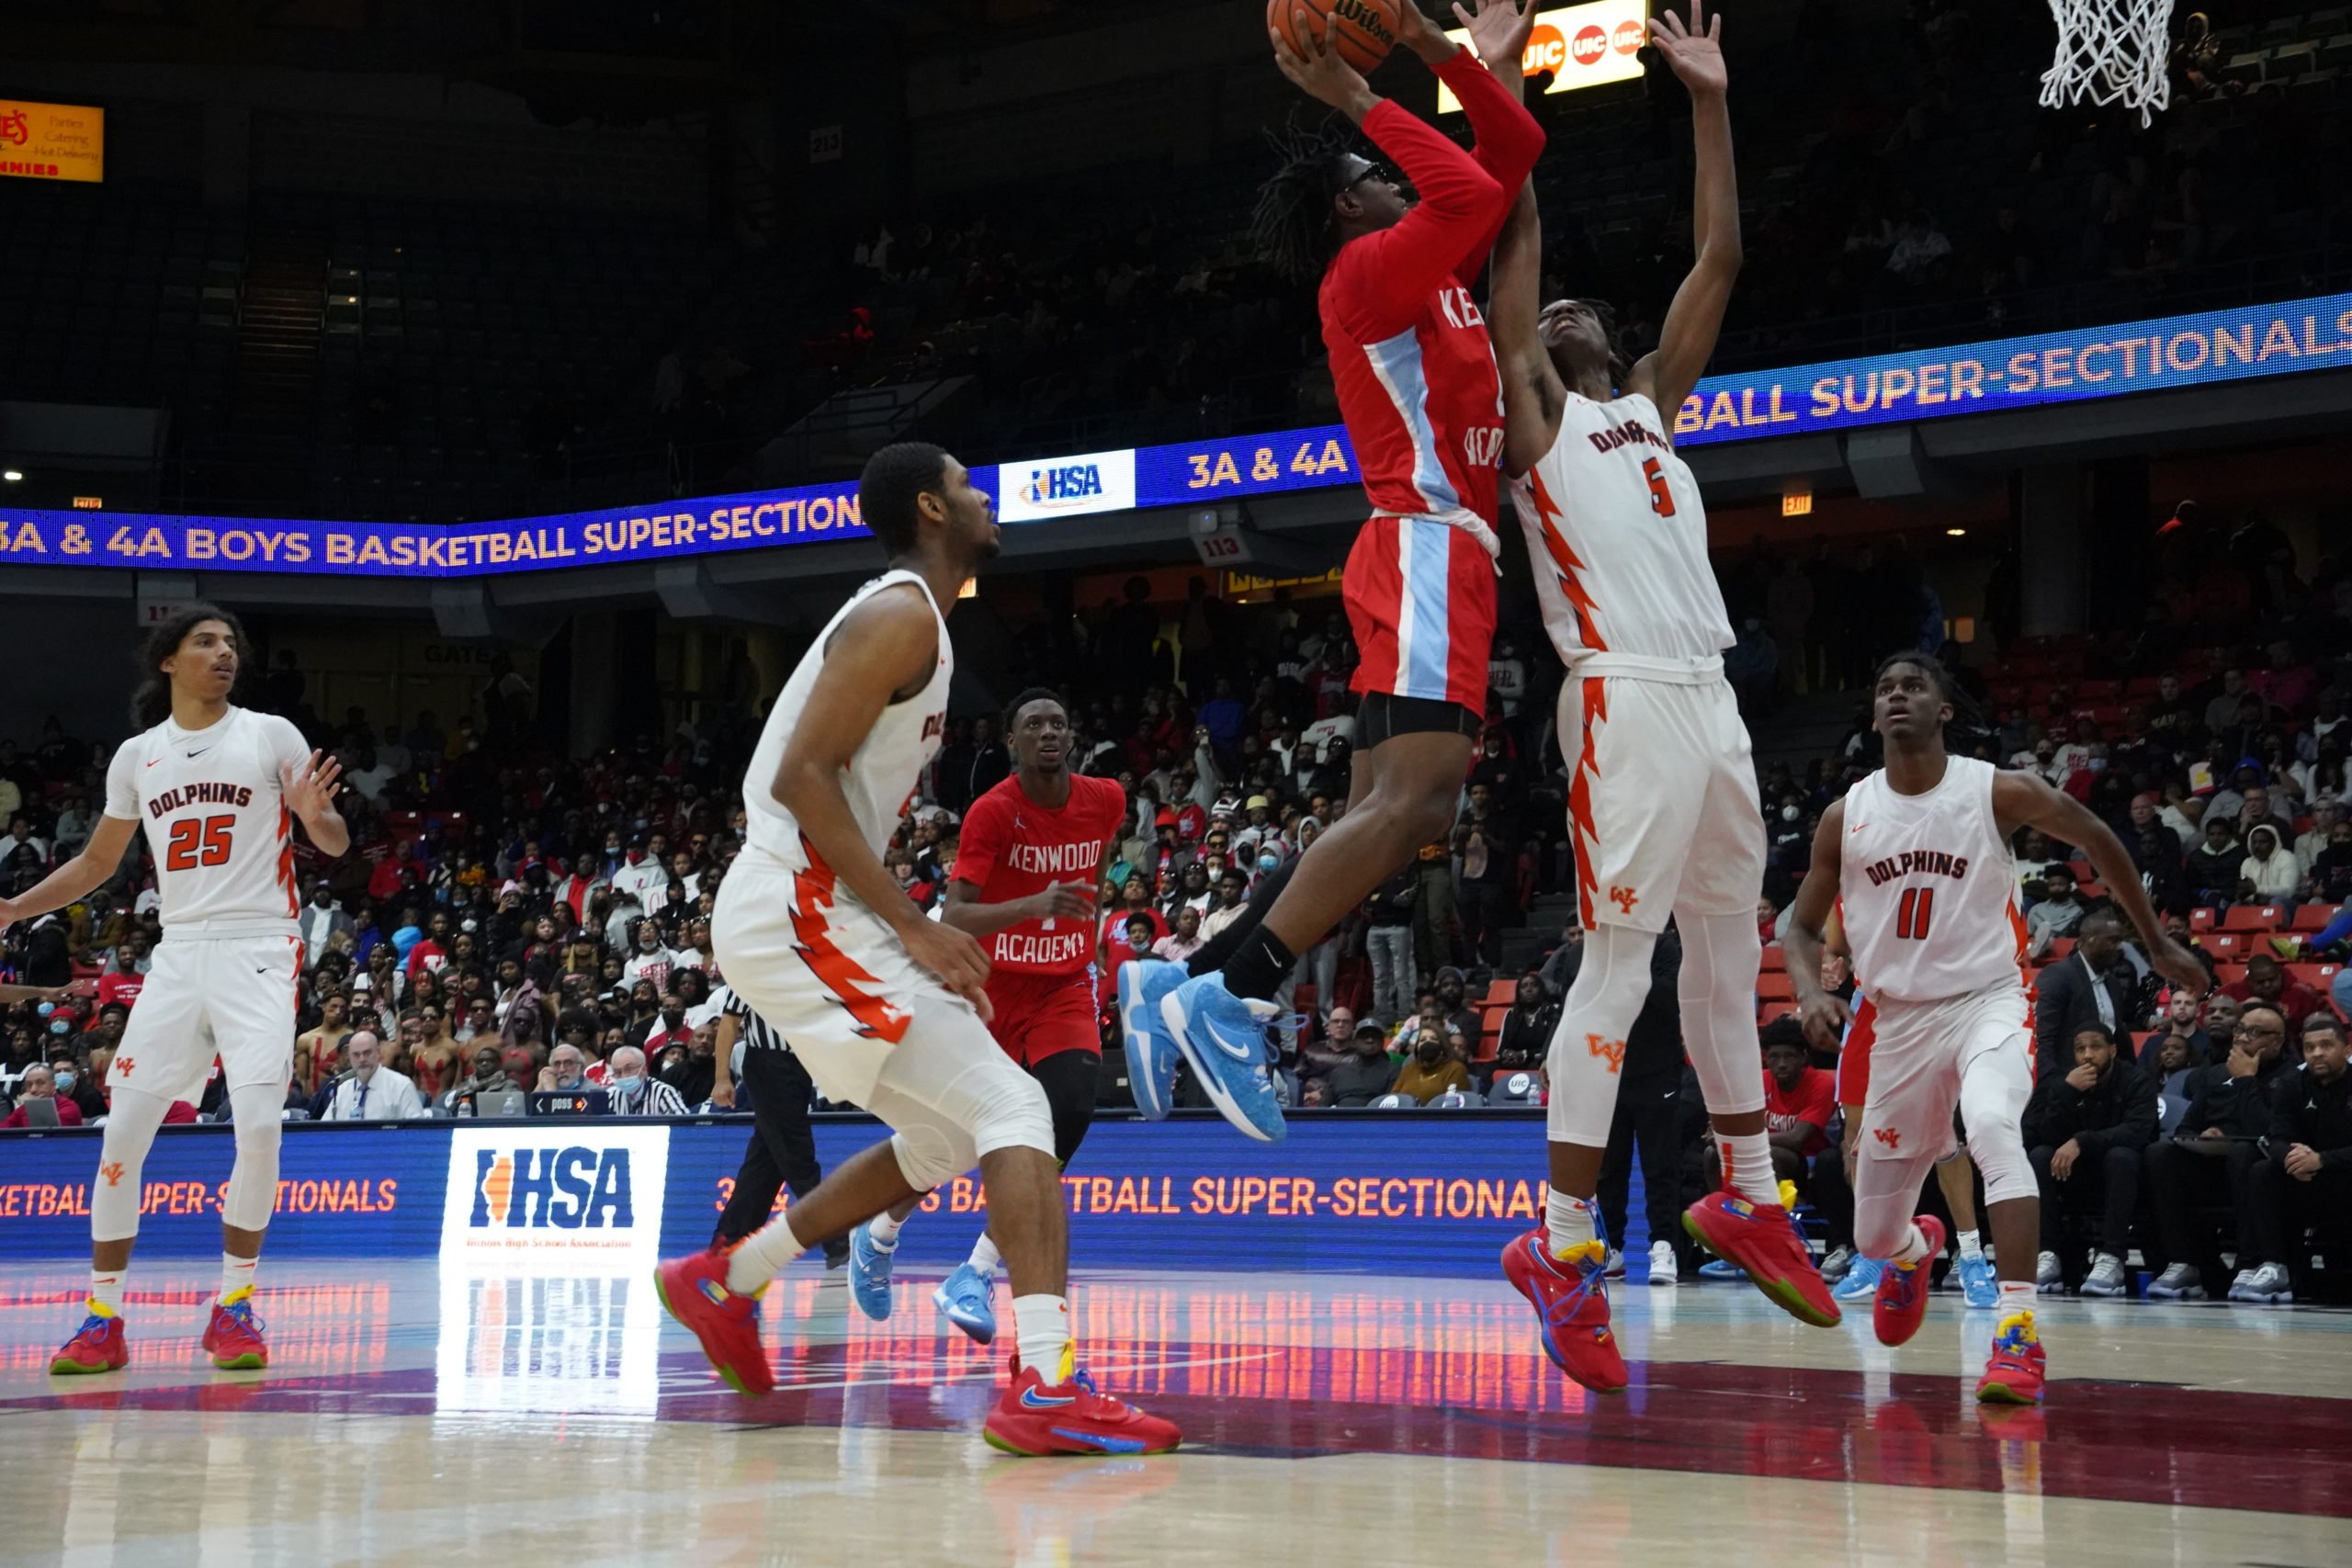 A Kenwood player shooting the ball into a hoop